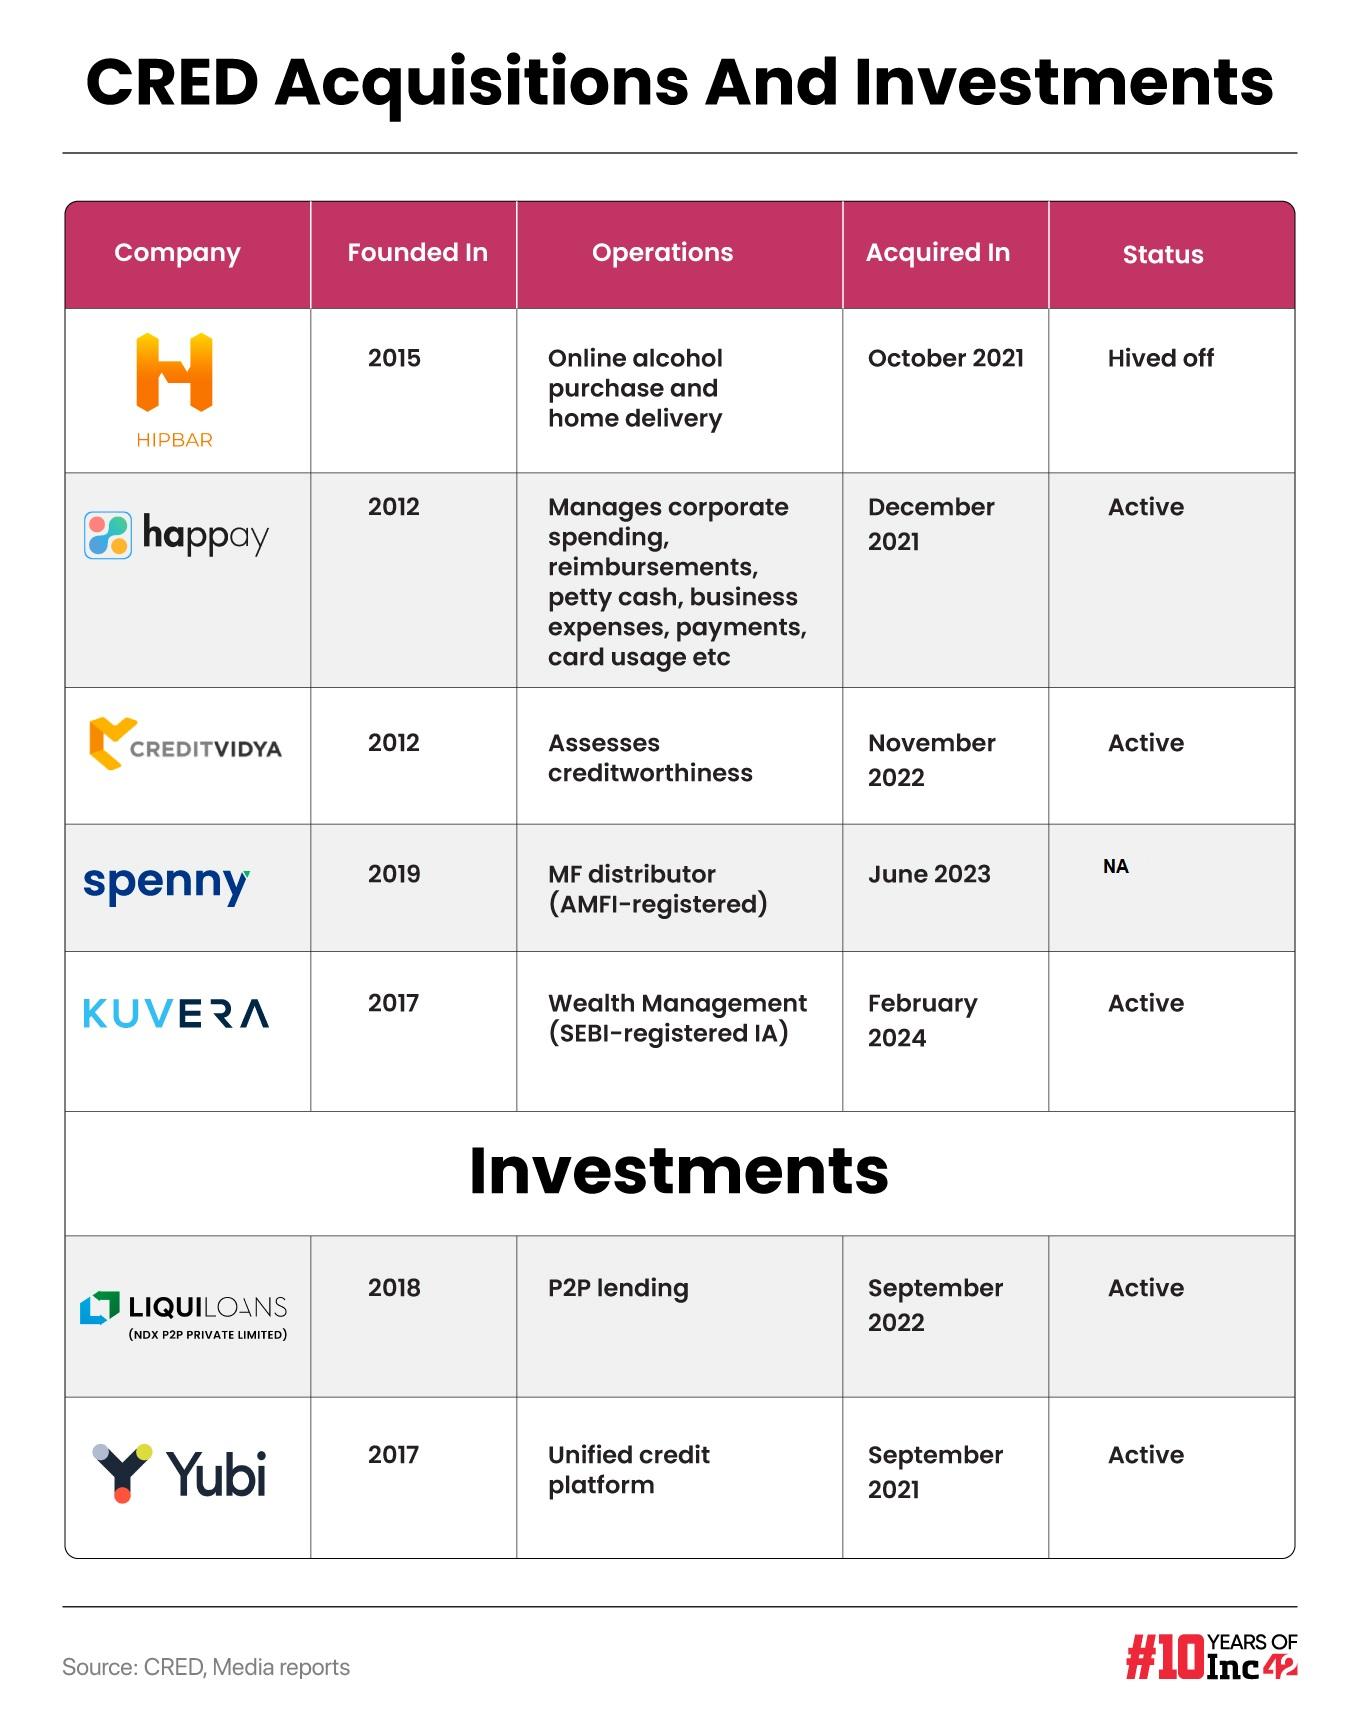 CRED acquisitions and investments